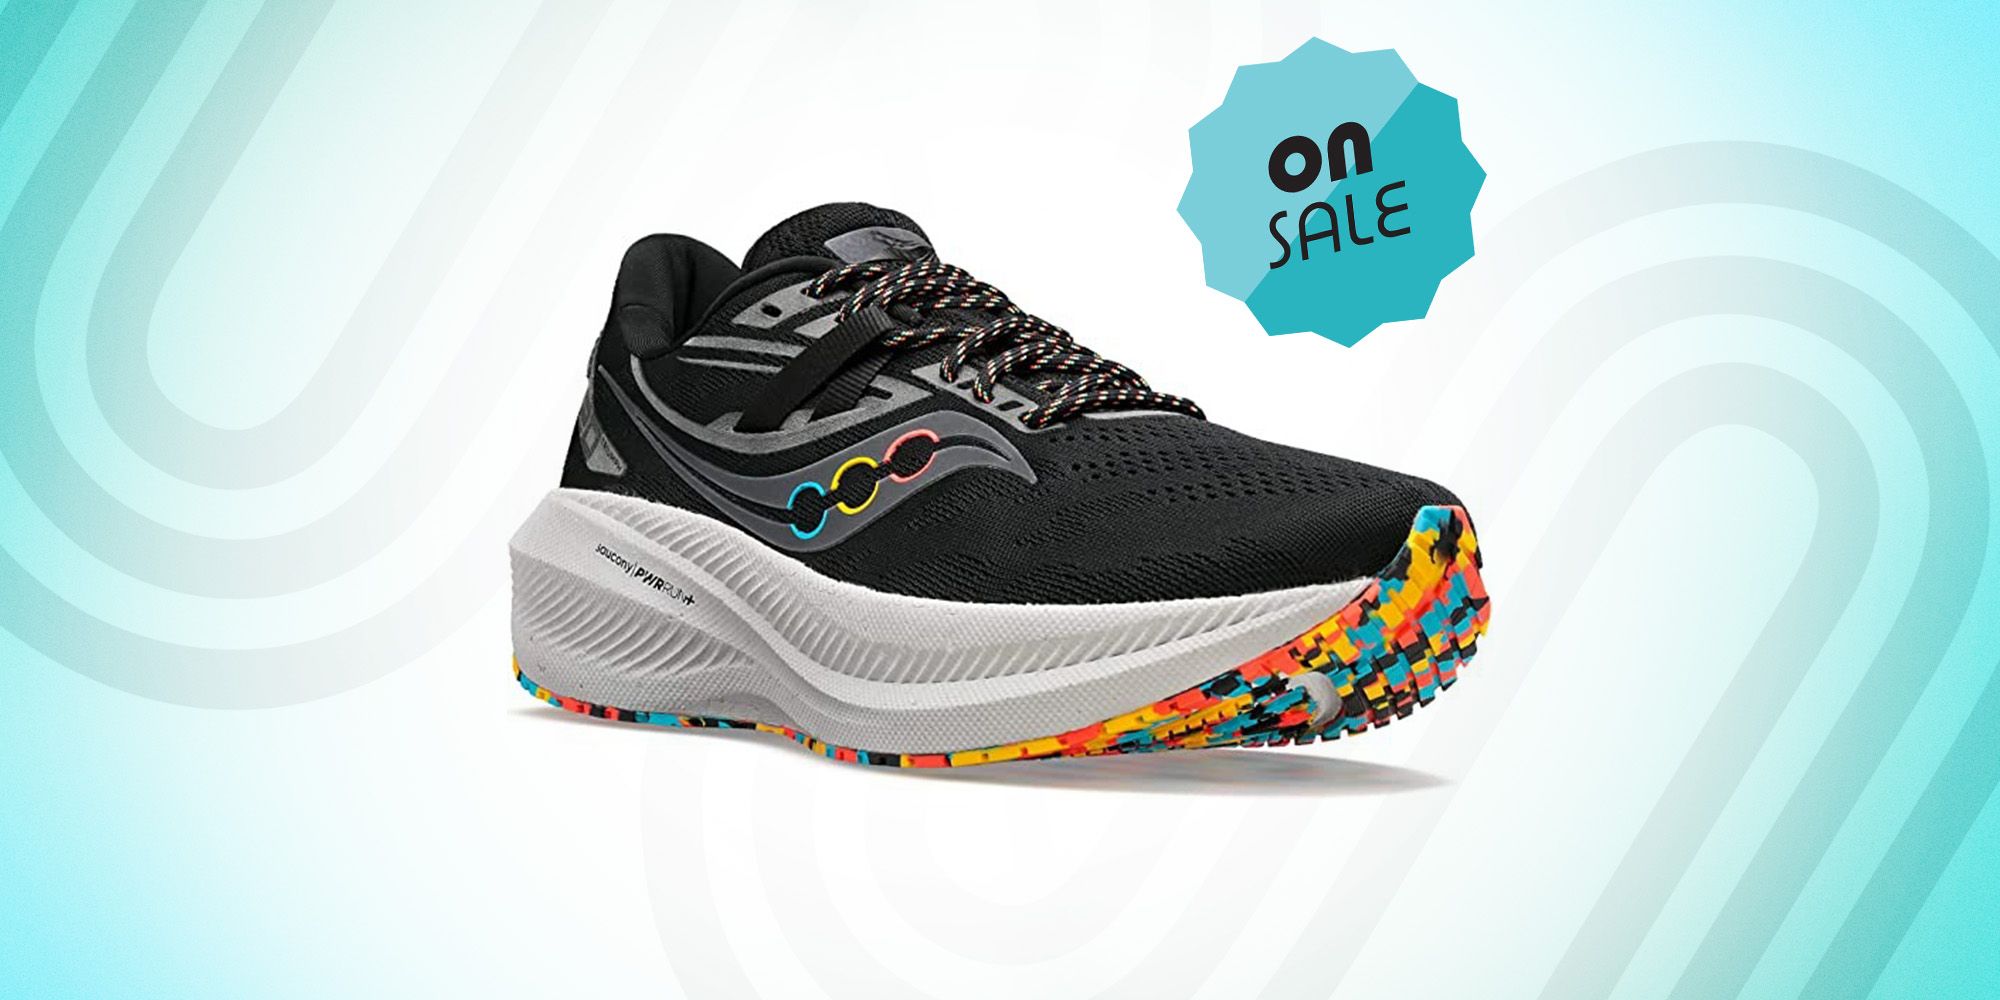 These Editor Preferred Saucony Running Shoes Are Up to % Off on